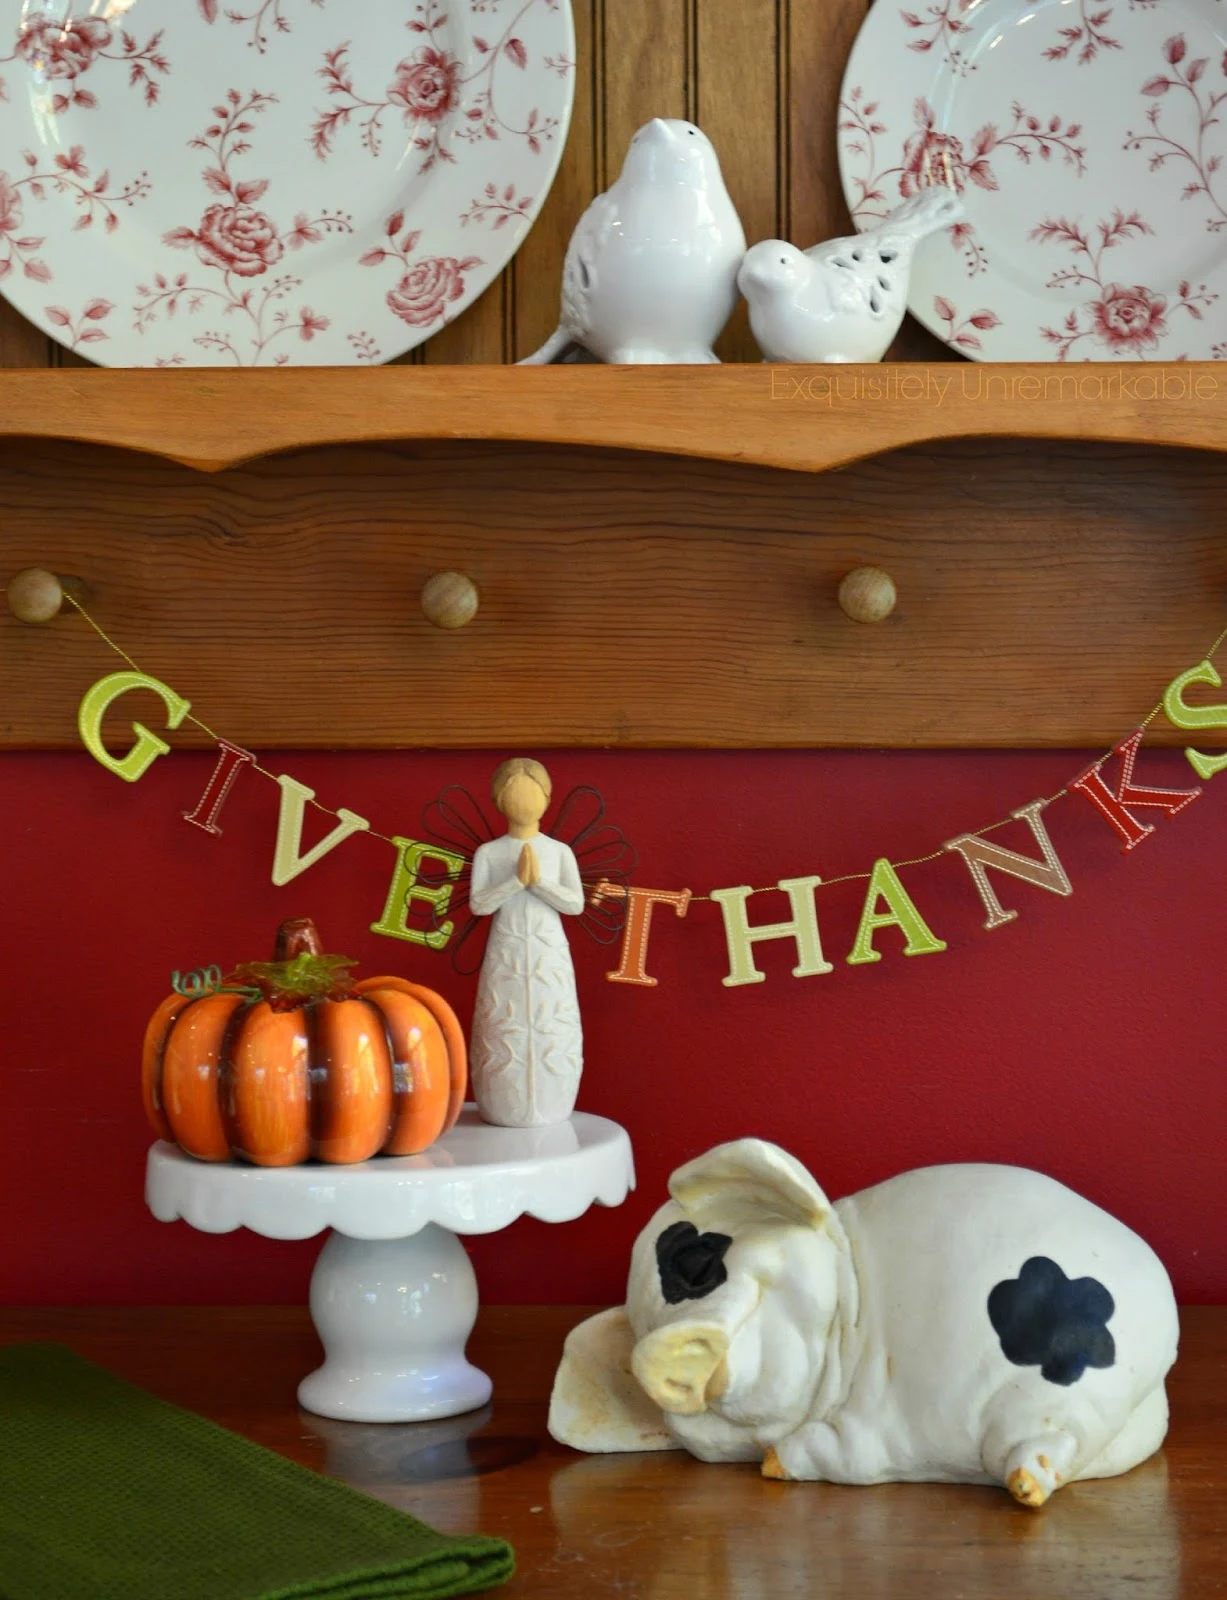 Give Thanks Letter Banner hung on a plate rack next to small statues of angel, pumpkin and sleeping piglet